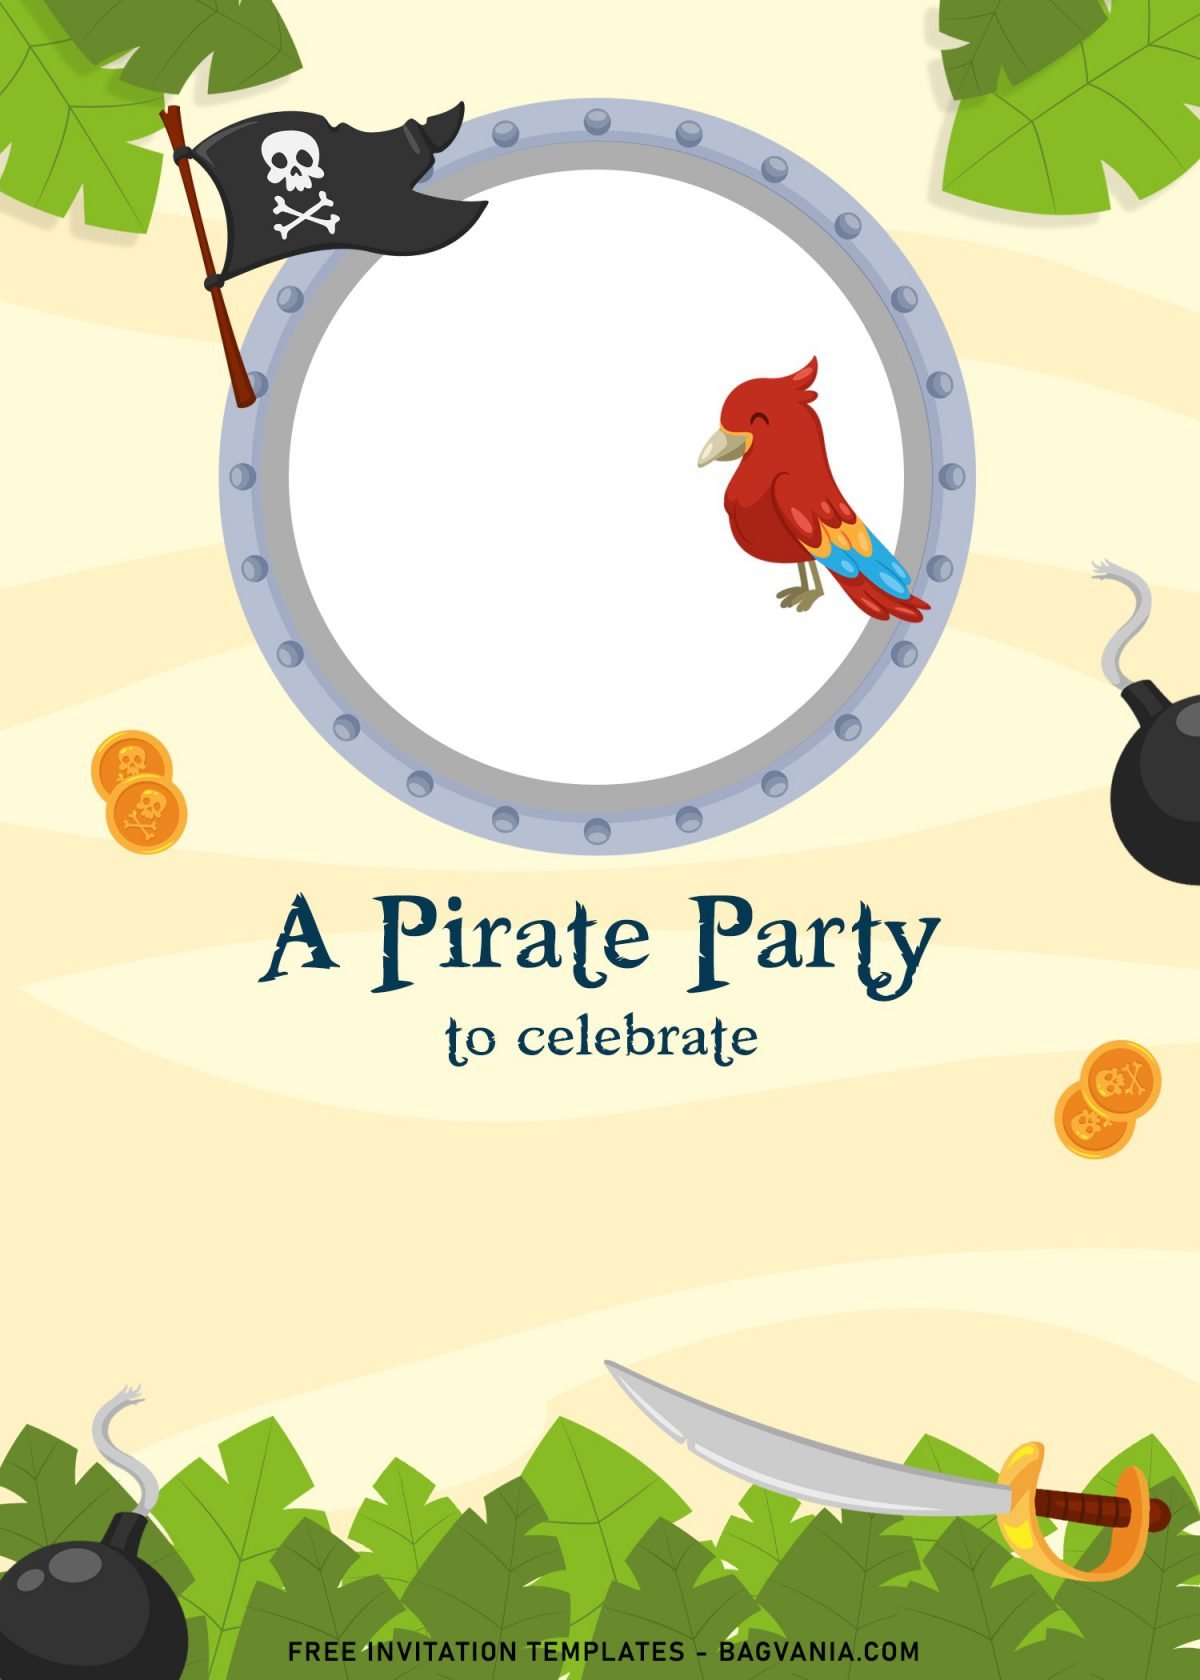 9+ Cute Pirate Birthday Invitation Templates For Your Son's Upcoming Birthday and has Ship Window